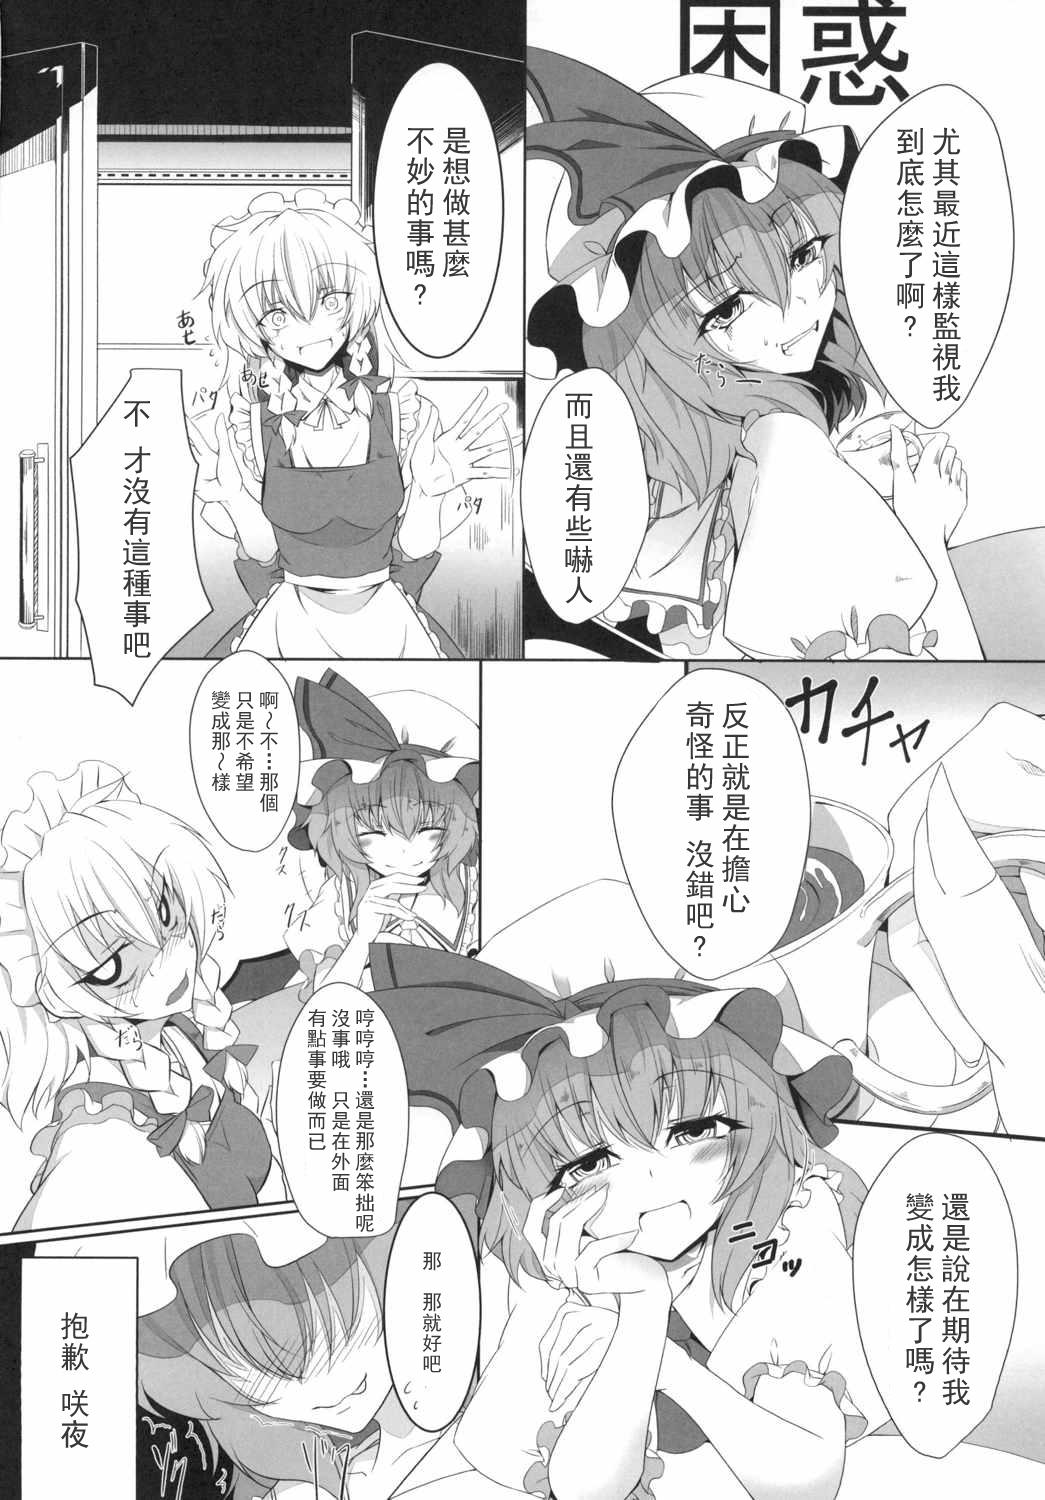 Naughty M.P. Vol. 4 - Touhou project Step Fantasy - Page 6